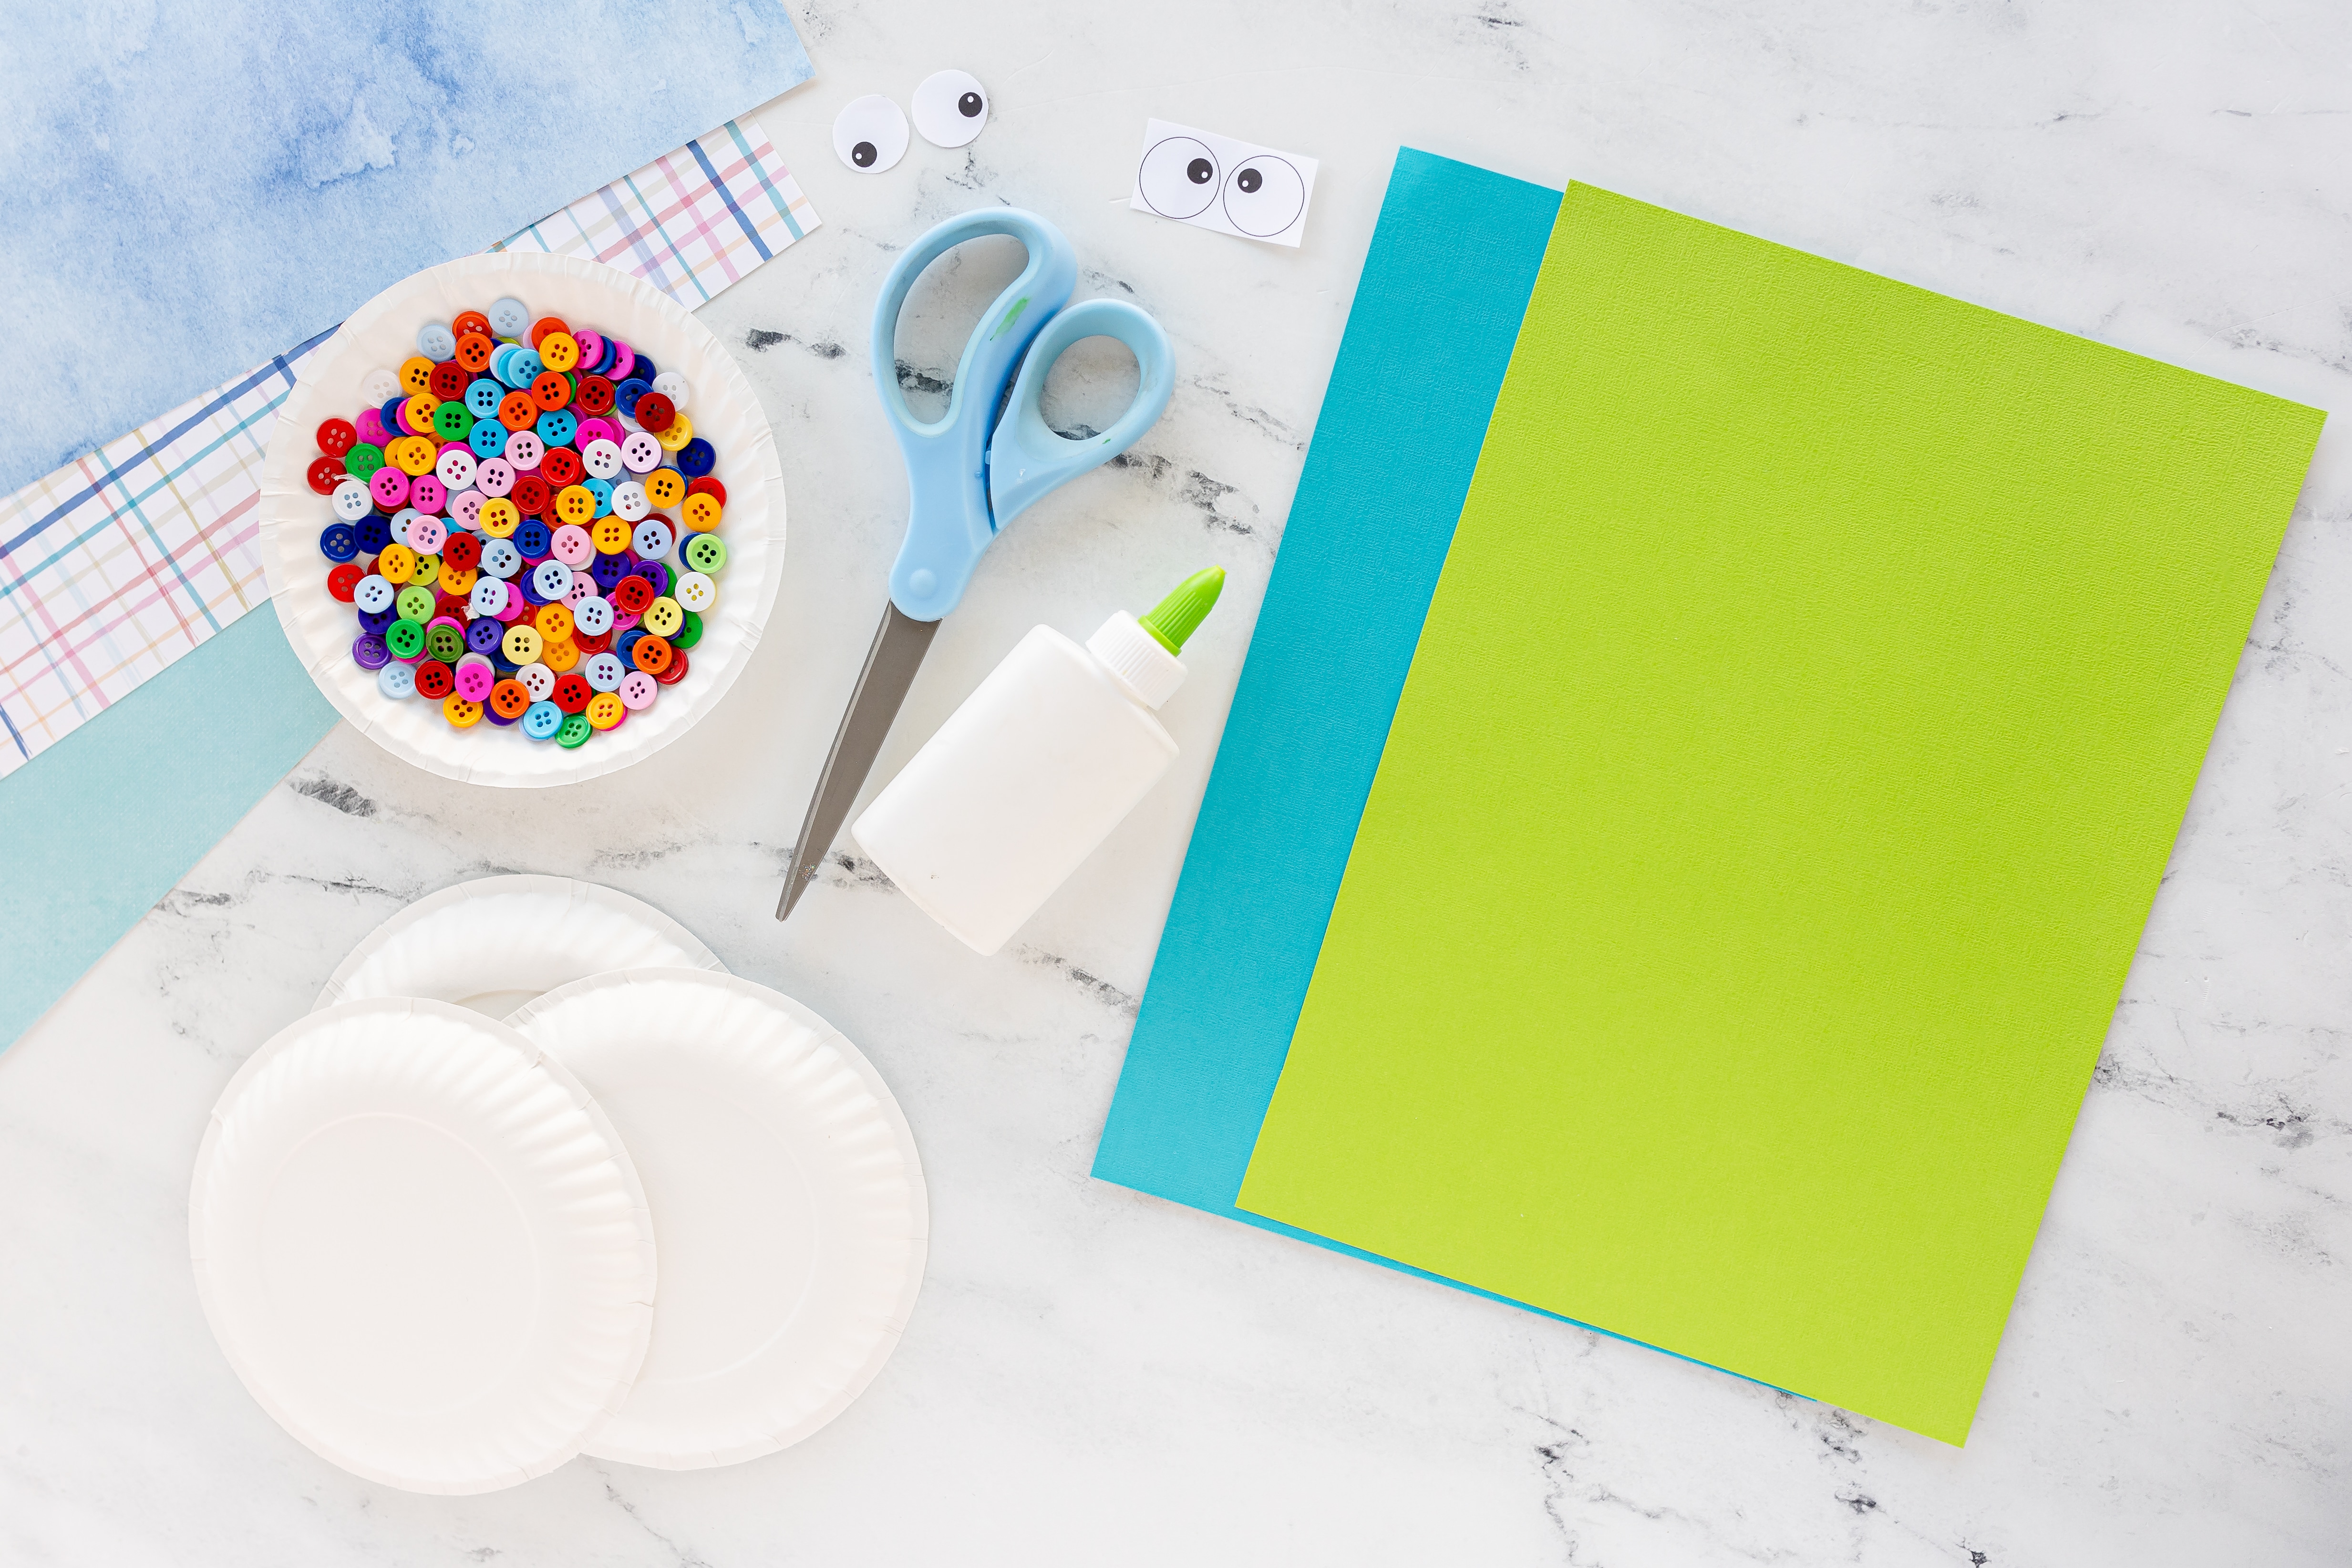 supplies needed for snail craft - paper, buttons, paper plate, eyes